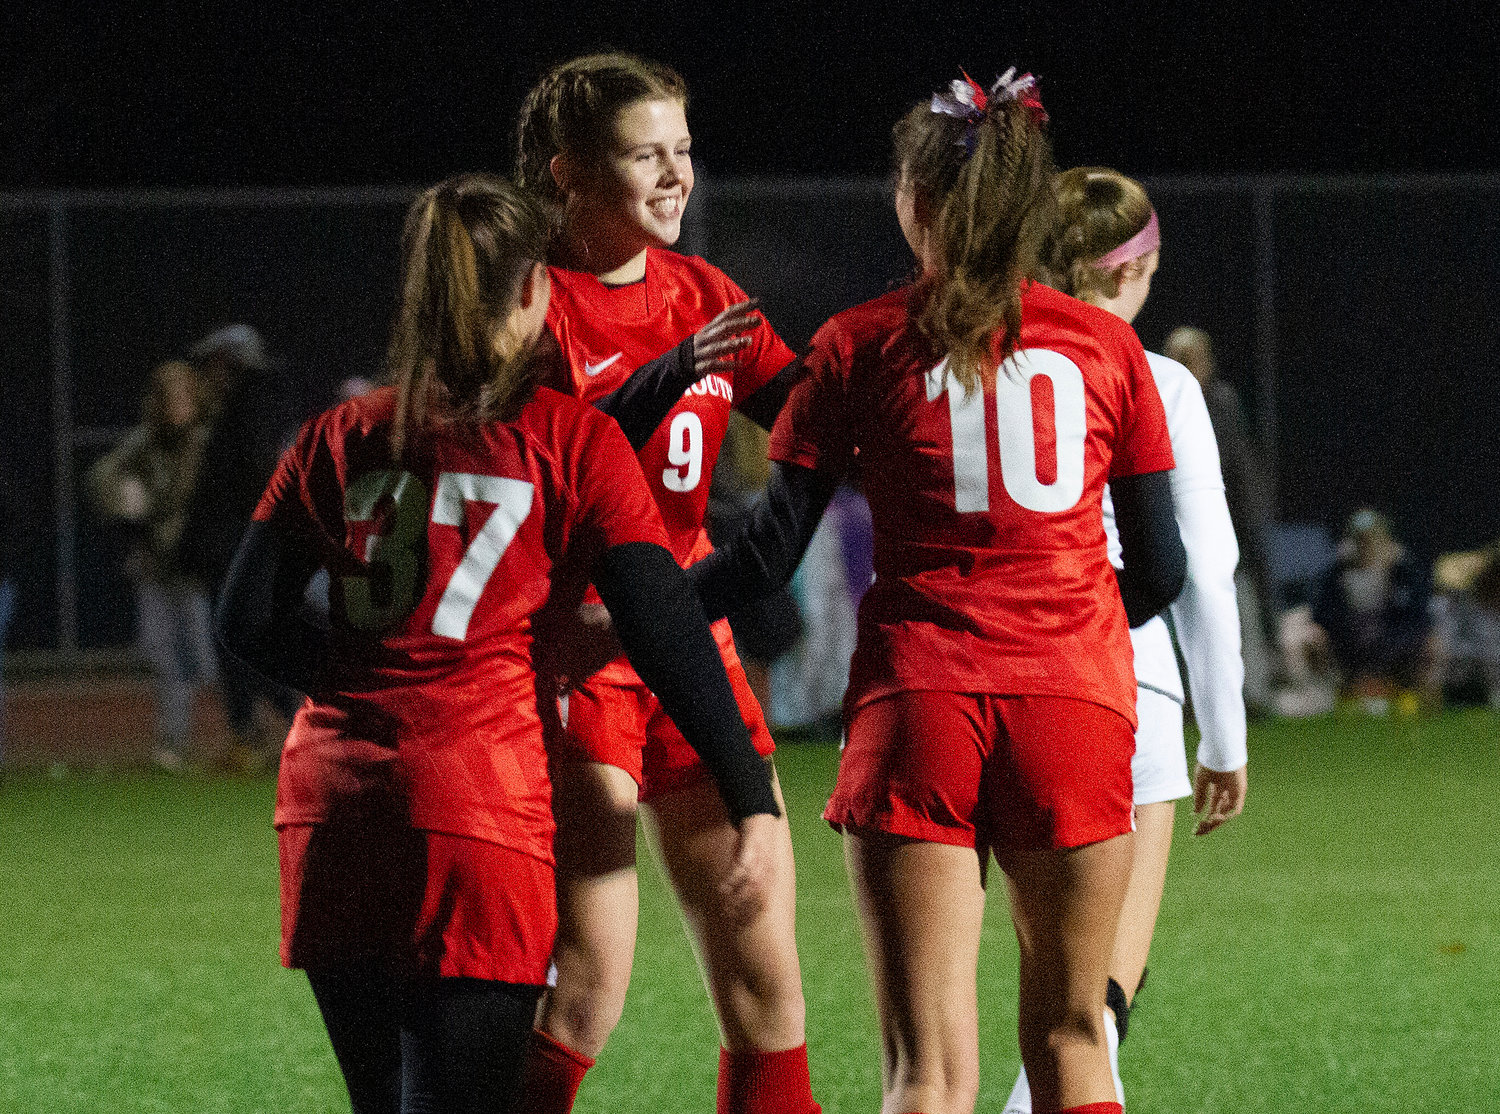 Evelyn Shuster, Poppy Jelly, and Kaitlin Roche (from left) celebrate after Roche booted in a penalty kick in the second half to make the score 5-0.